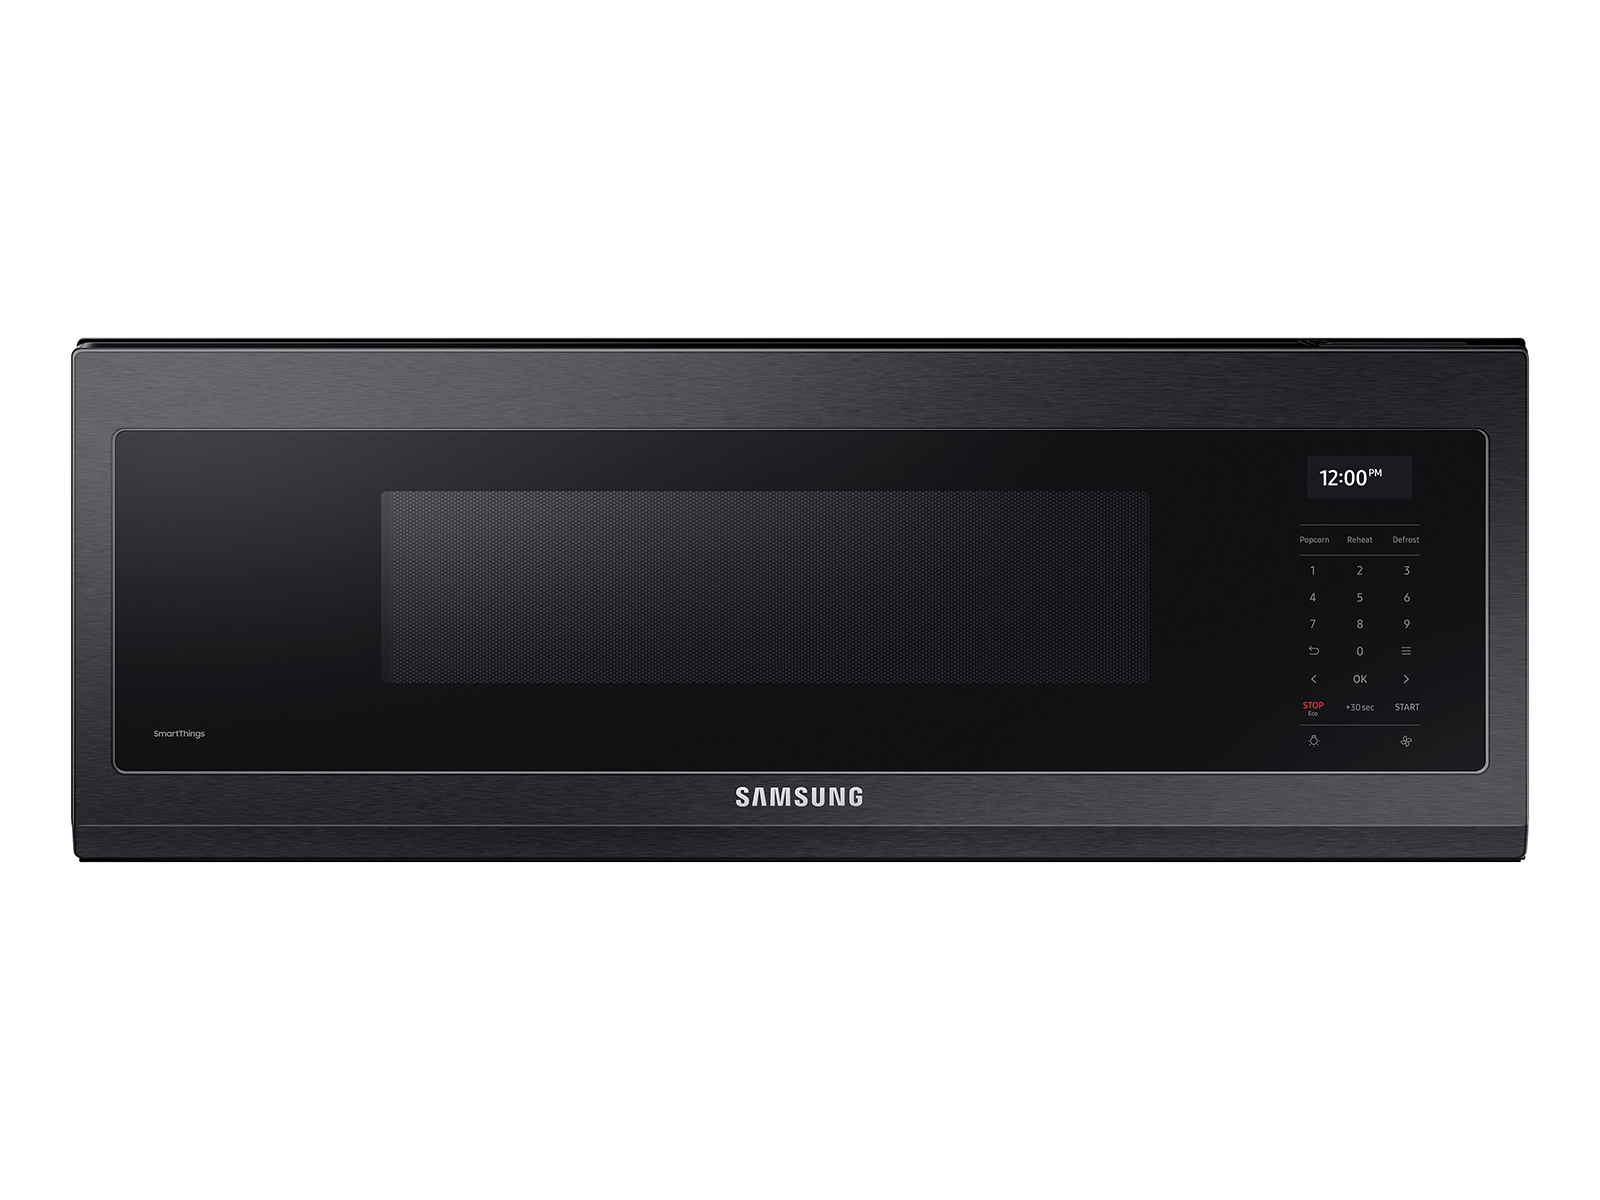 Samsung 1.1 cu. ft. Smart SLIM Over-the-Range Microwave with 550 CFM Hood Ventilation, Wi-Fi & Voice Control in Black Stainless Steel